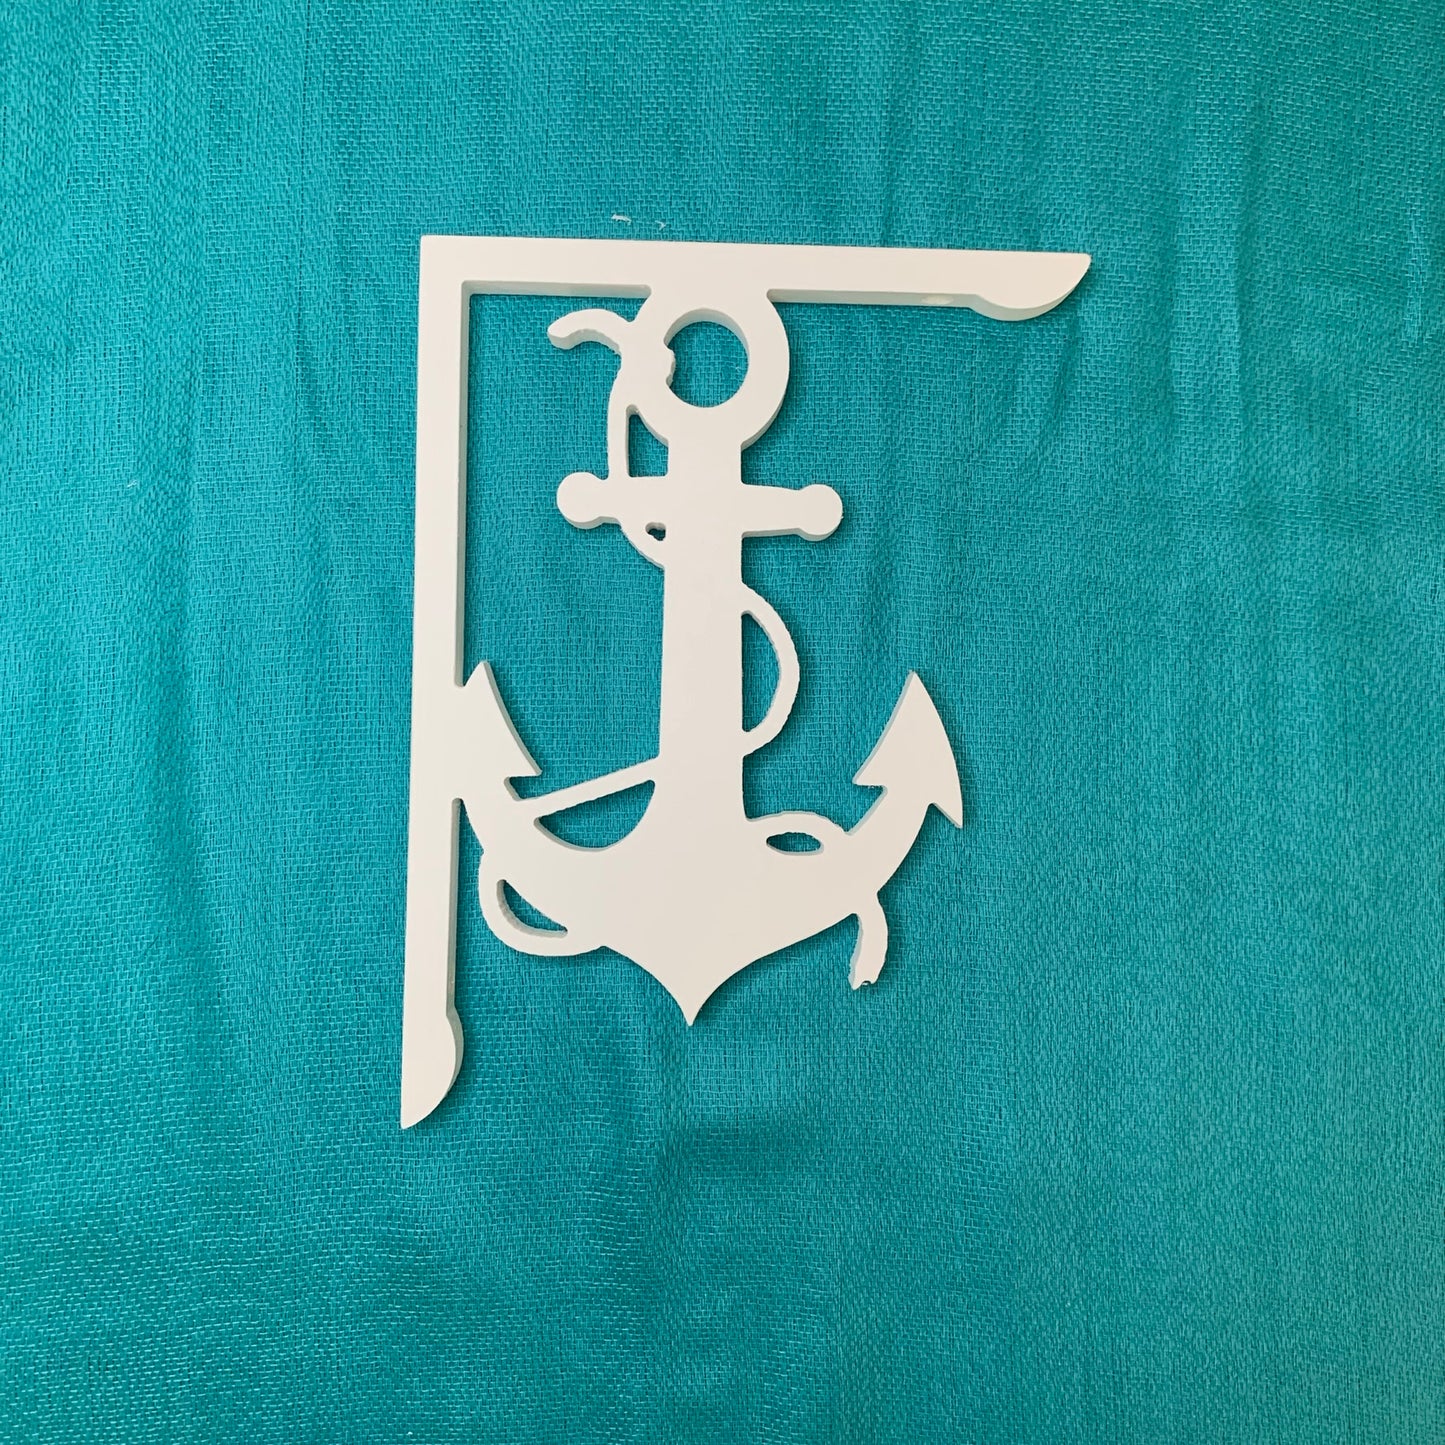 Mailbox Bracket - Anchor with Rope Small 7x9 inch, Custom Mailbox, Coastal, Tropical, Bracket, Outdoor Decor, Mailbox & Post Not Included